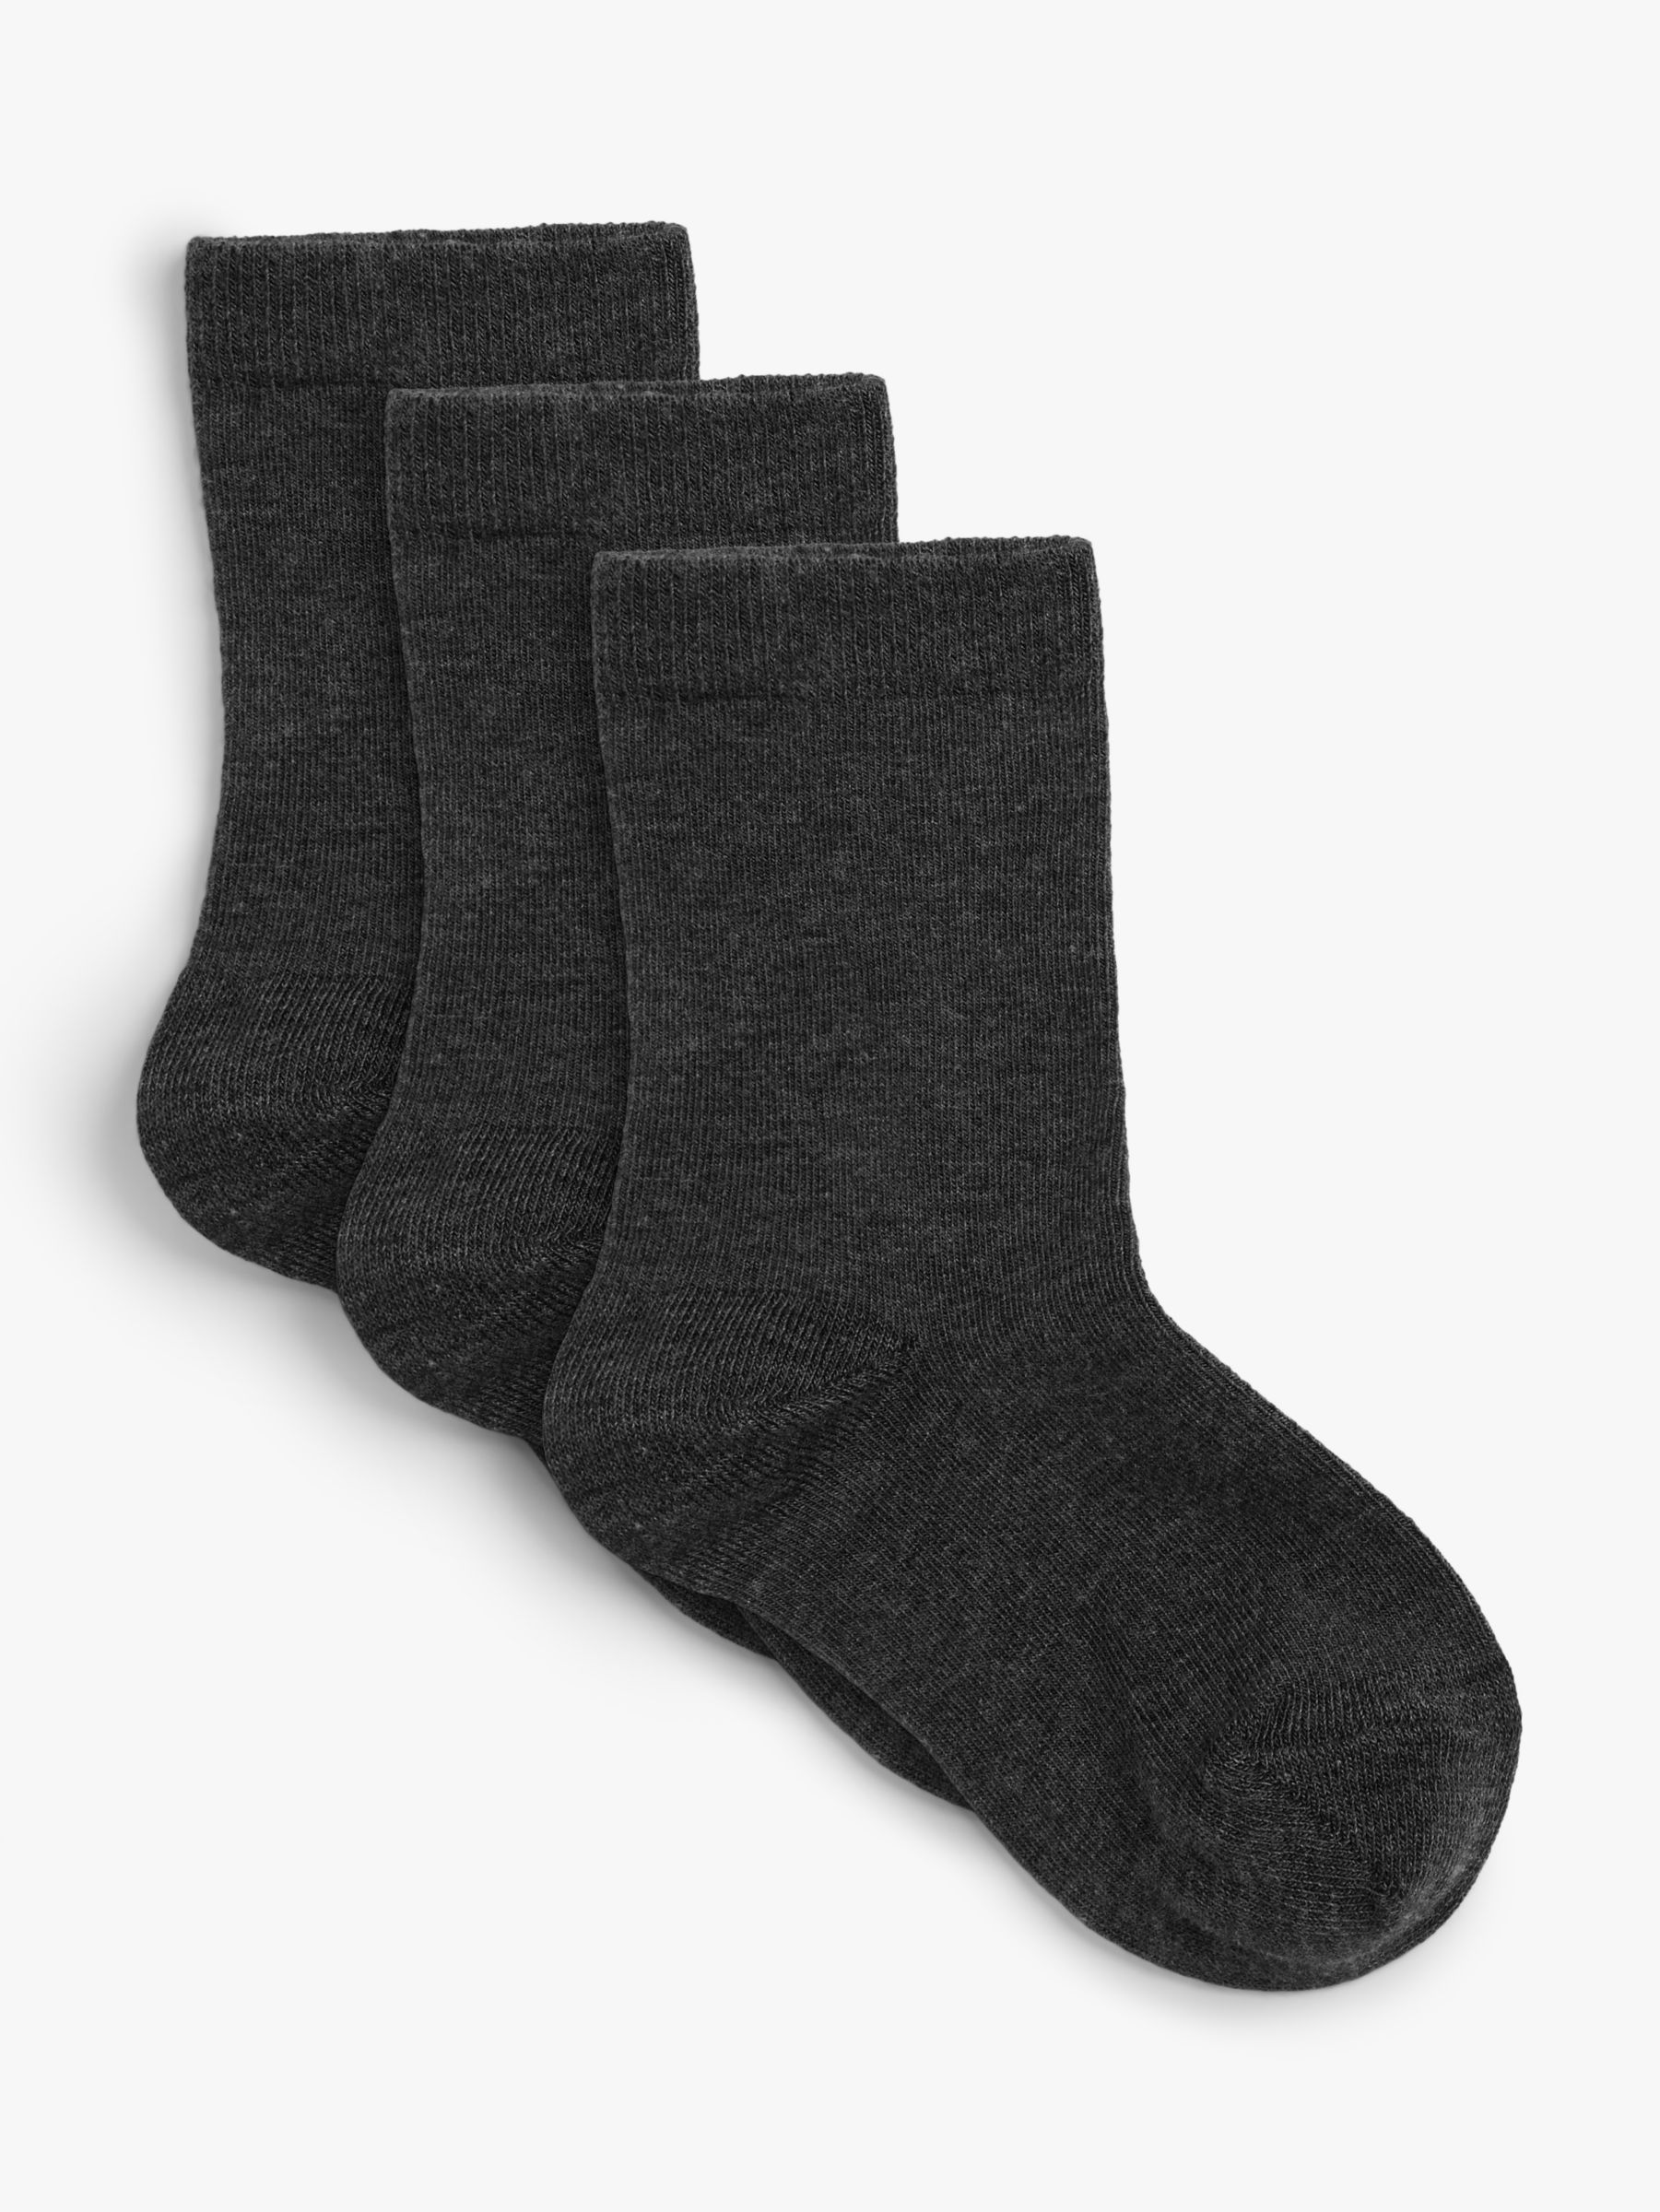 John Lewis Kids' Supersoft Thermal Ankle Socks, Pack of 3, Charcoal, 4-7